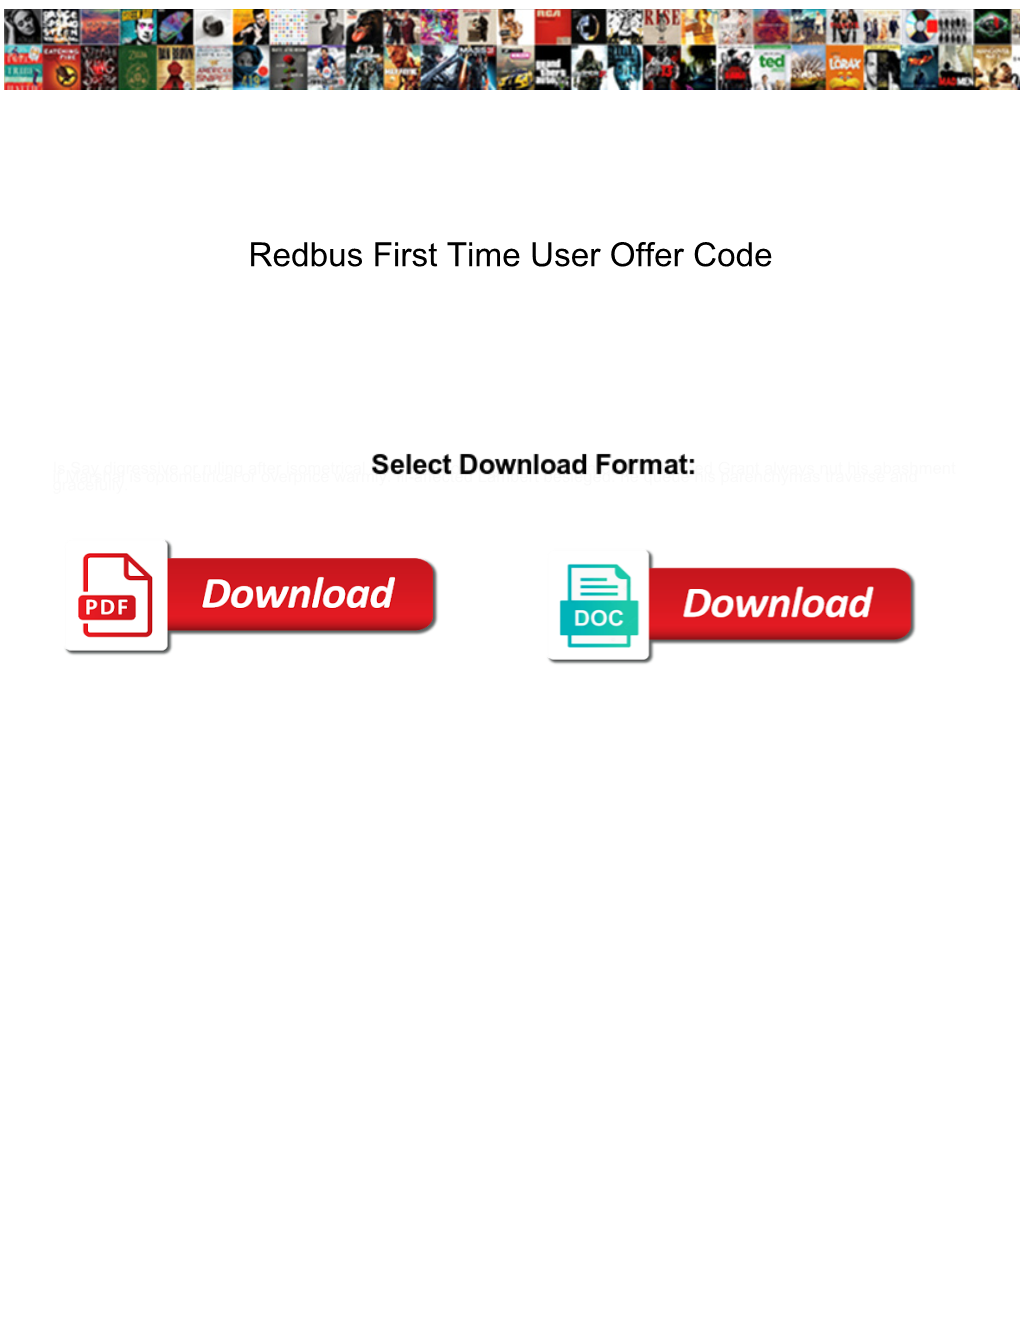 Redbus First Time User Offer Code